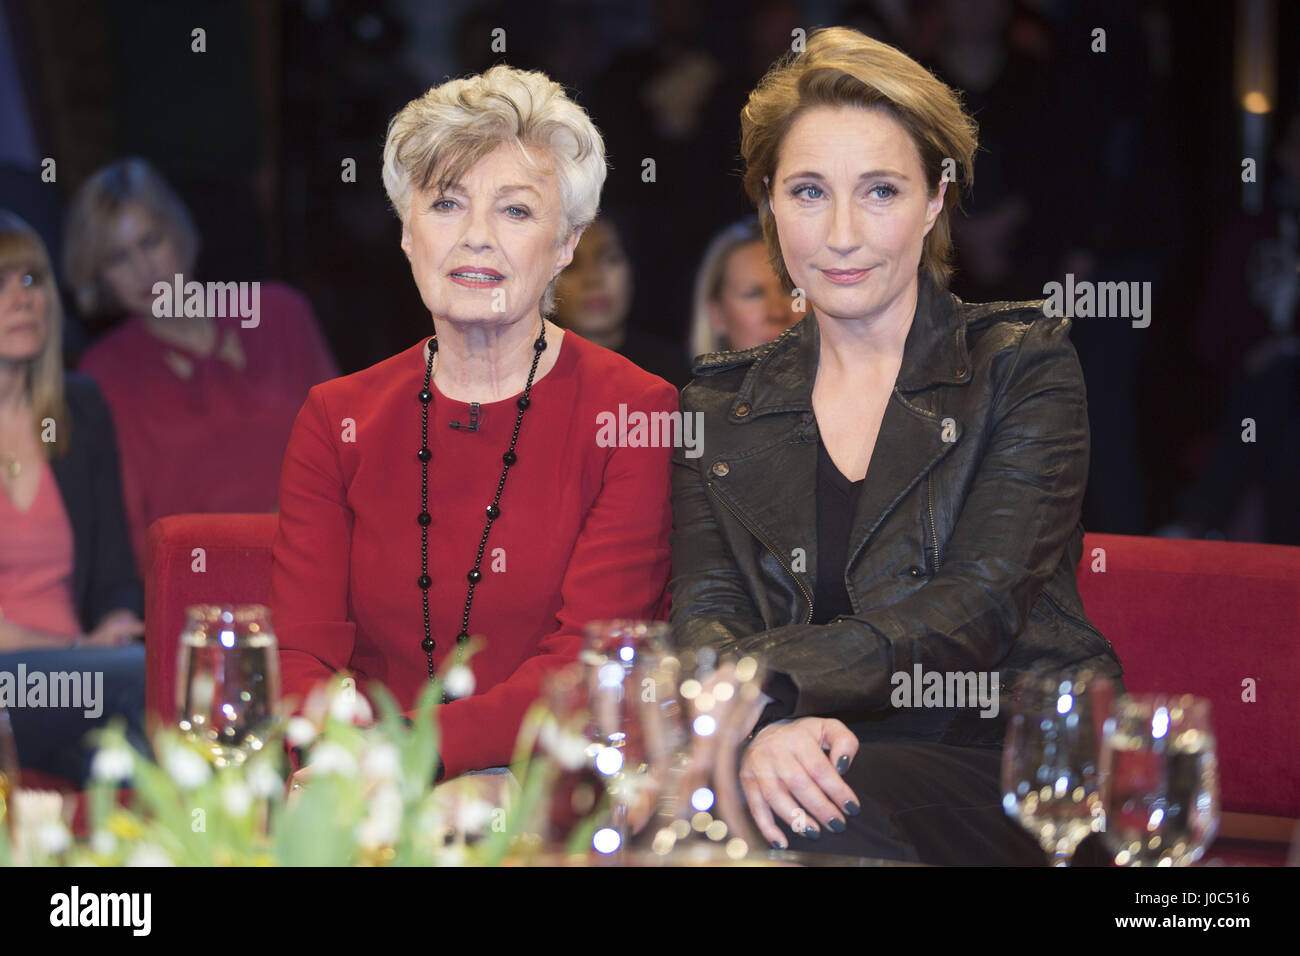 Page 7 - Talkshow High Resolution Stock Photography and Images - Alamy